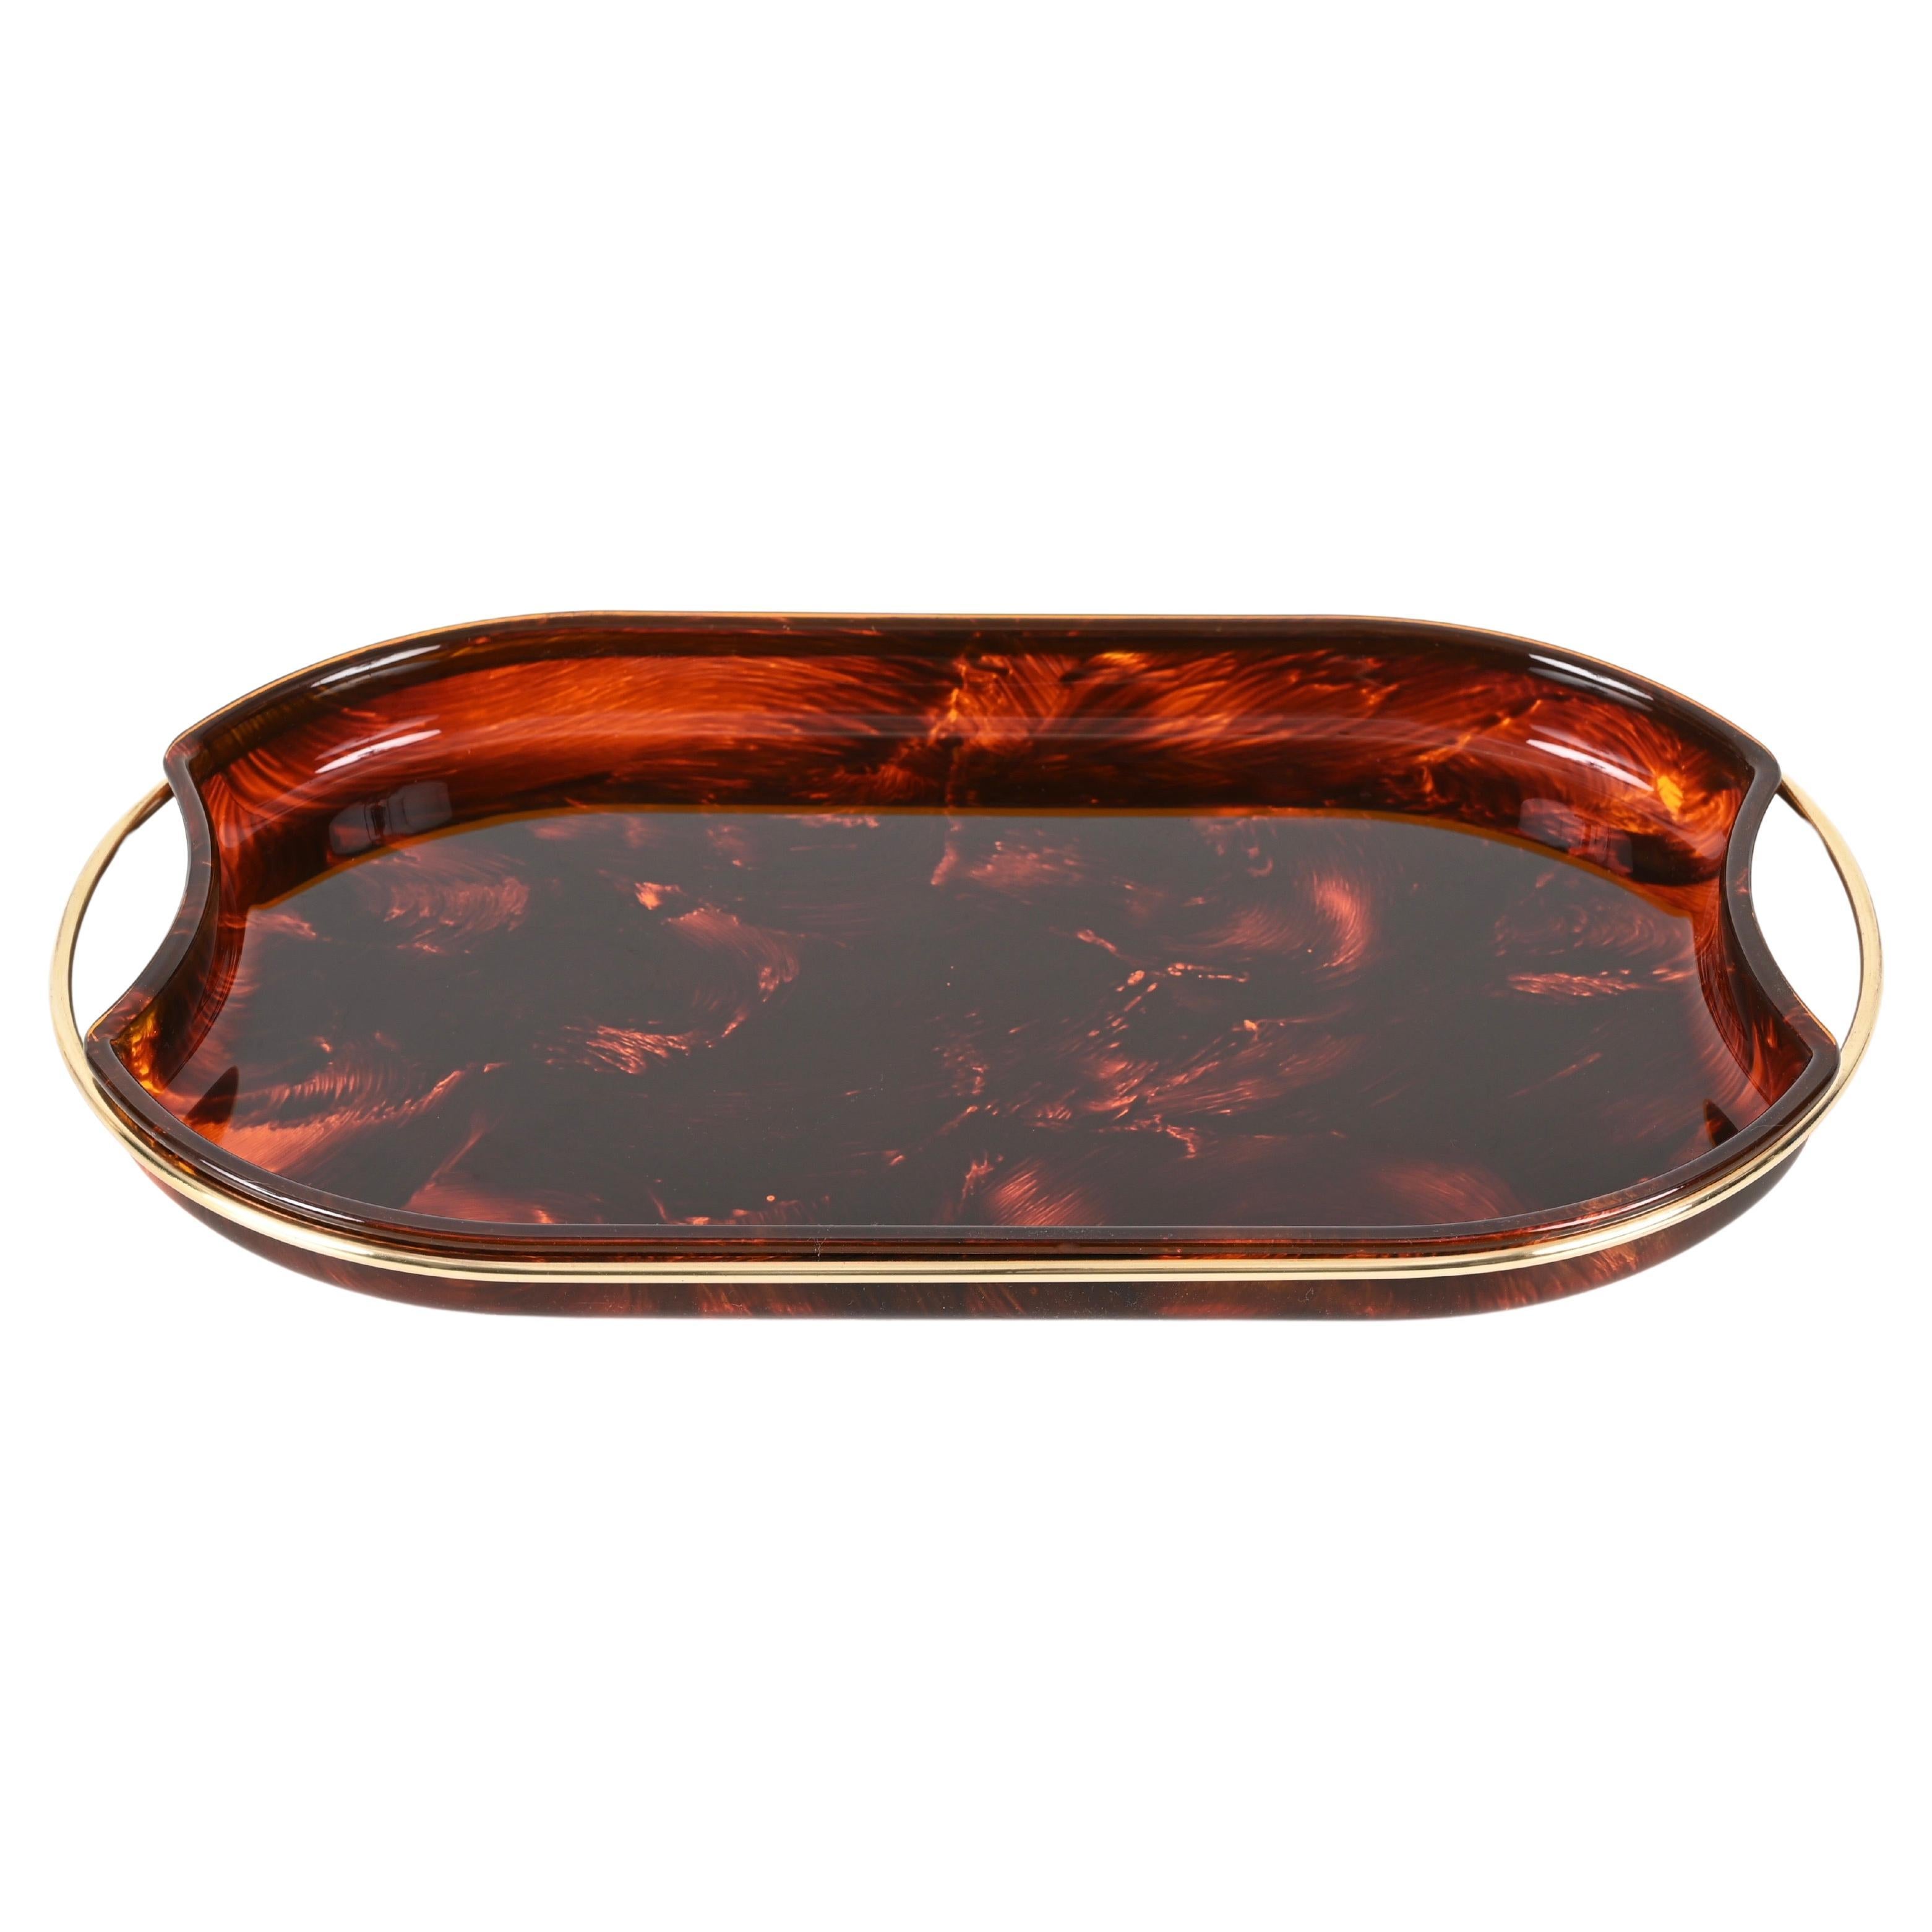 Midcentury Modern By Guzzini Italian Lucite and Brass Oval Serving Tray, 1970s